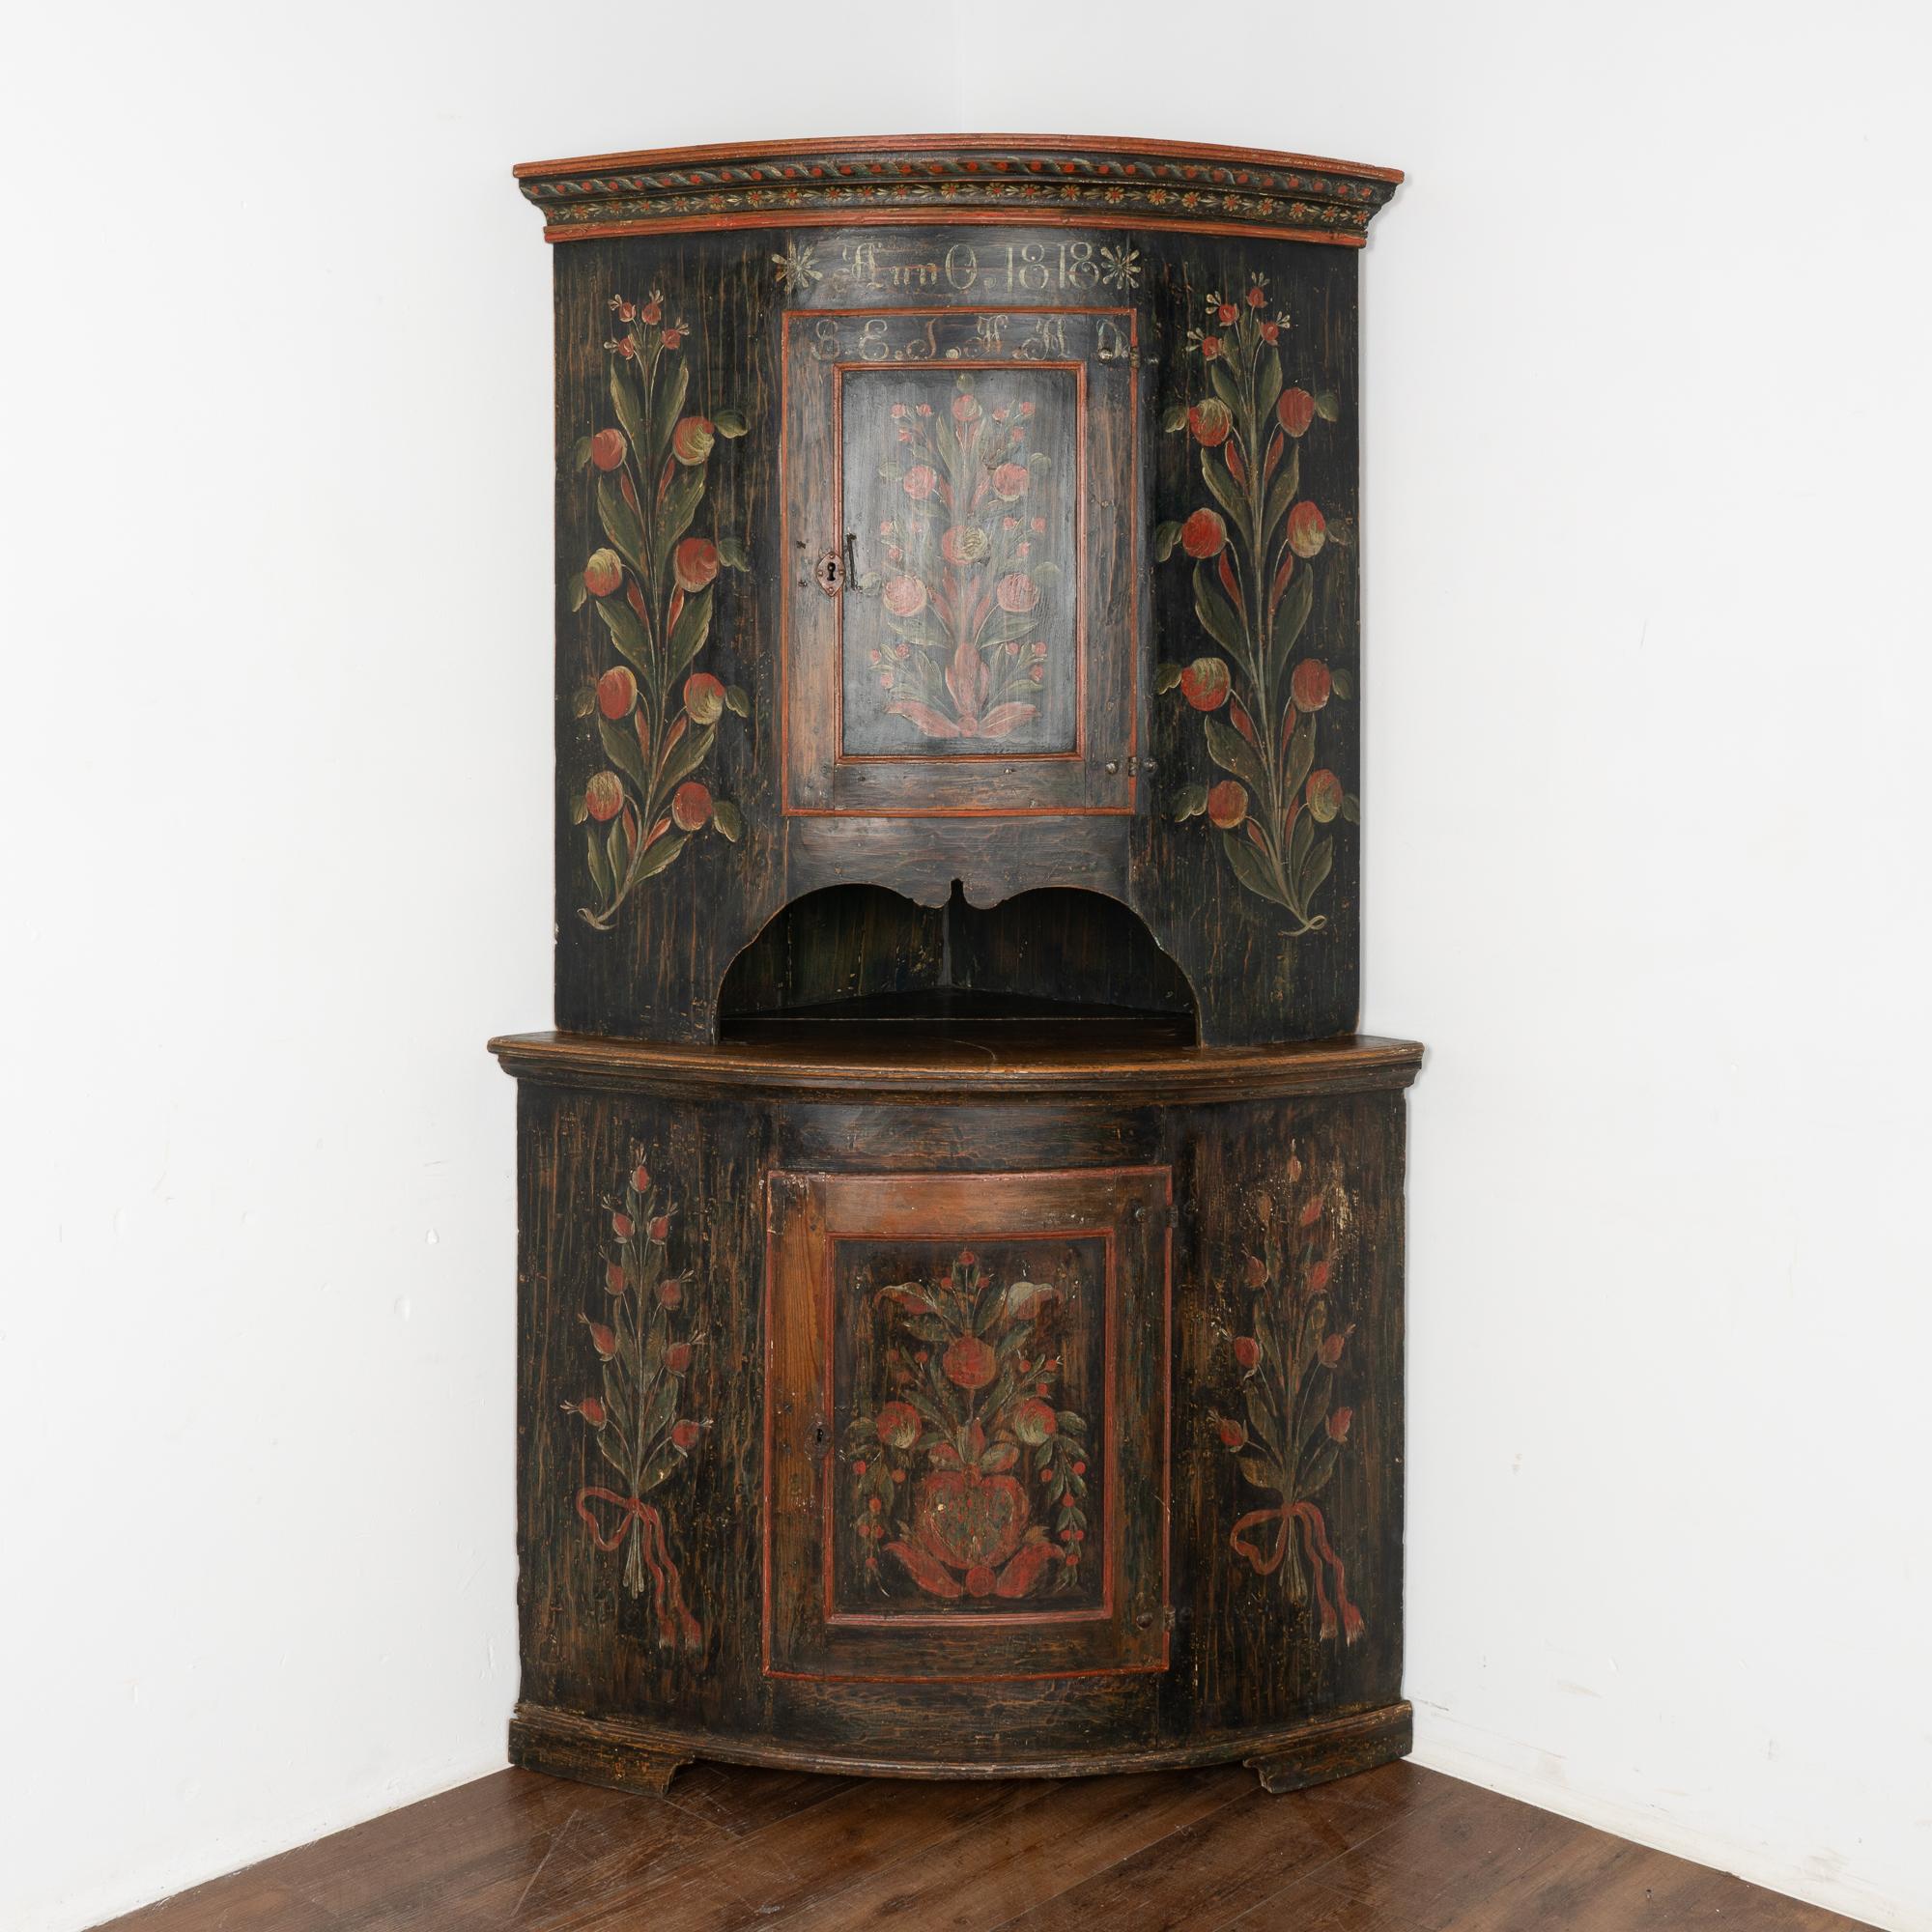 This stunning pine corner cabinet still maintains its original black painted finish with traditional floral details along panels and crown.
The monogram and date of 1818 indicate it was likely a very special wedding present.
This corner cupboard is